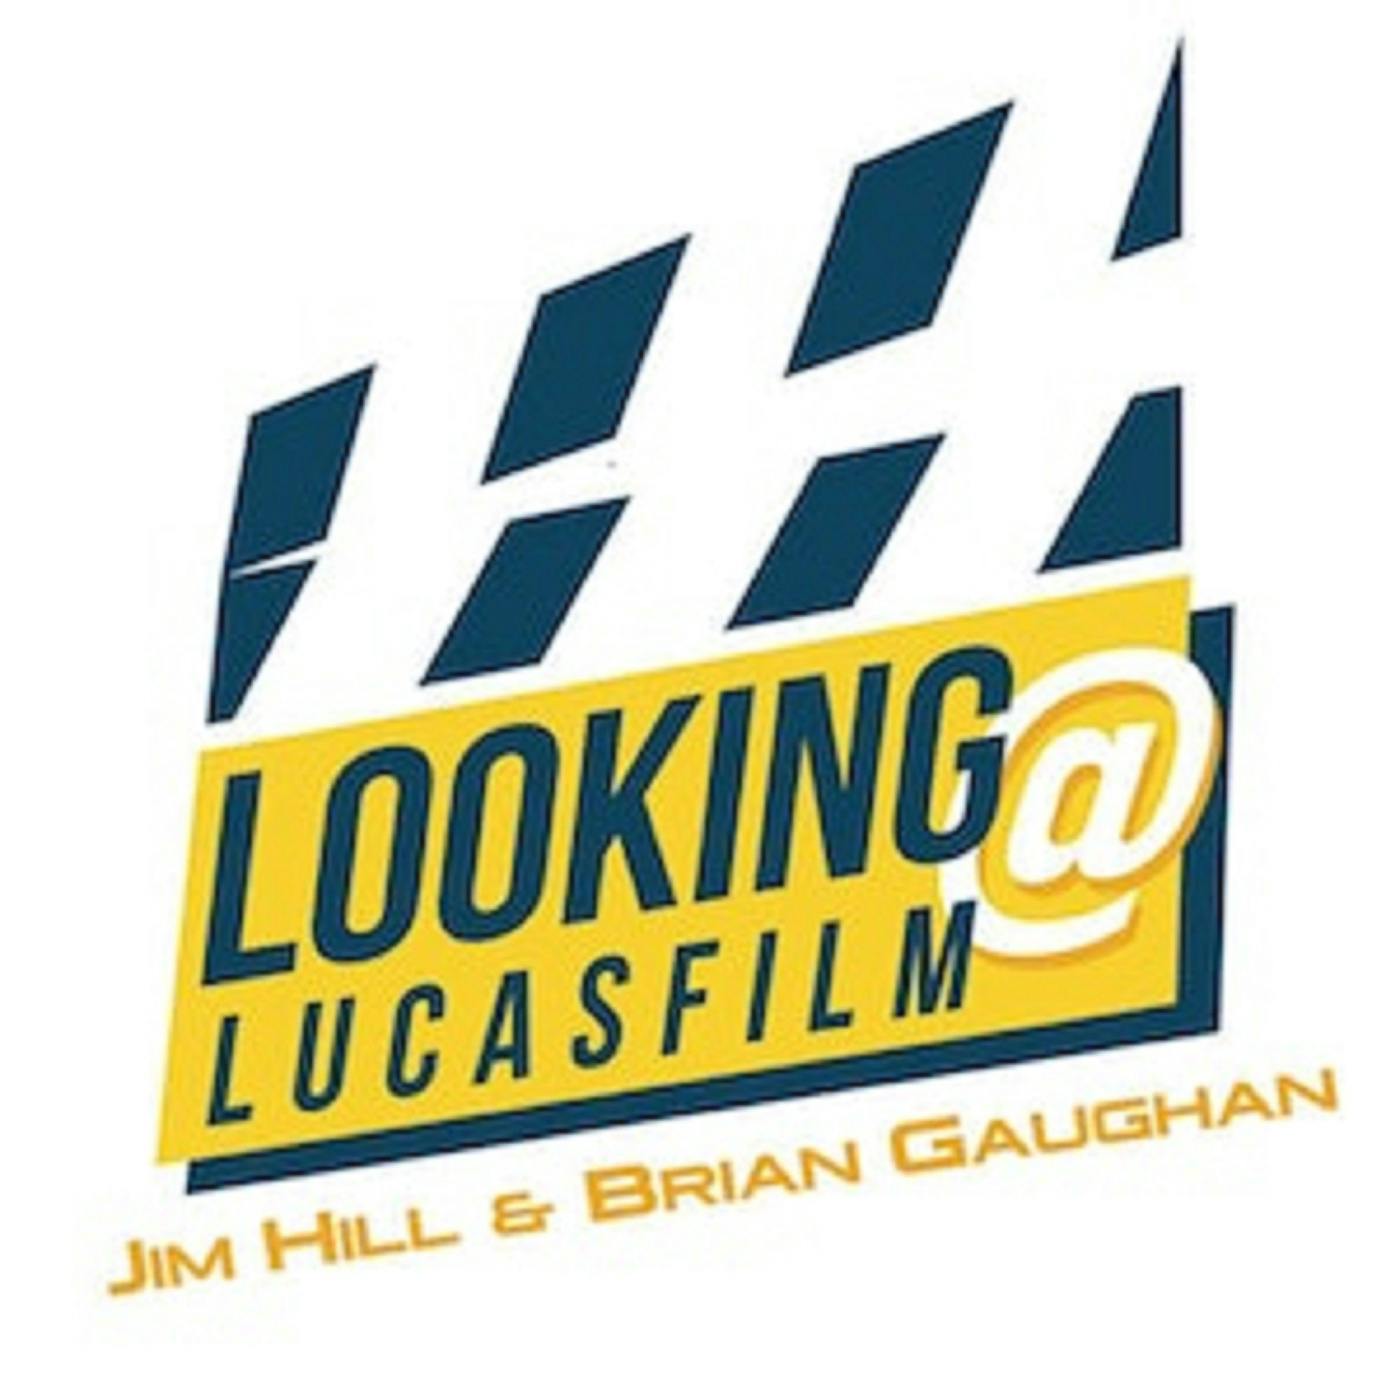 Looking at Lucasfilm with Brian Gaughan - Episode 88:  BD-1 droids go for a hike in Anaheim’s Galaxy’s Edge